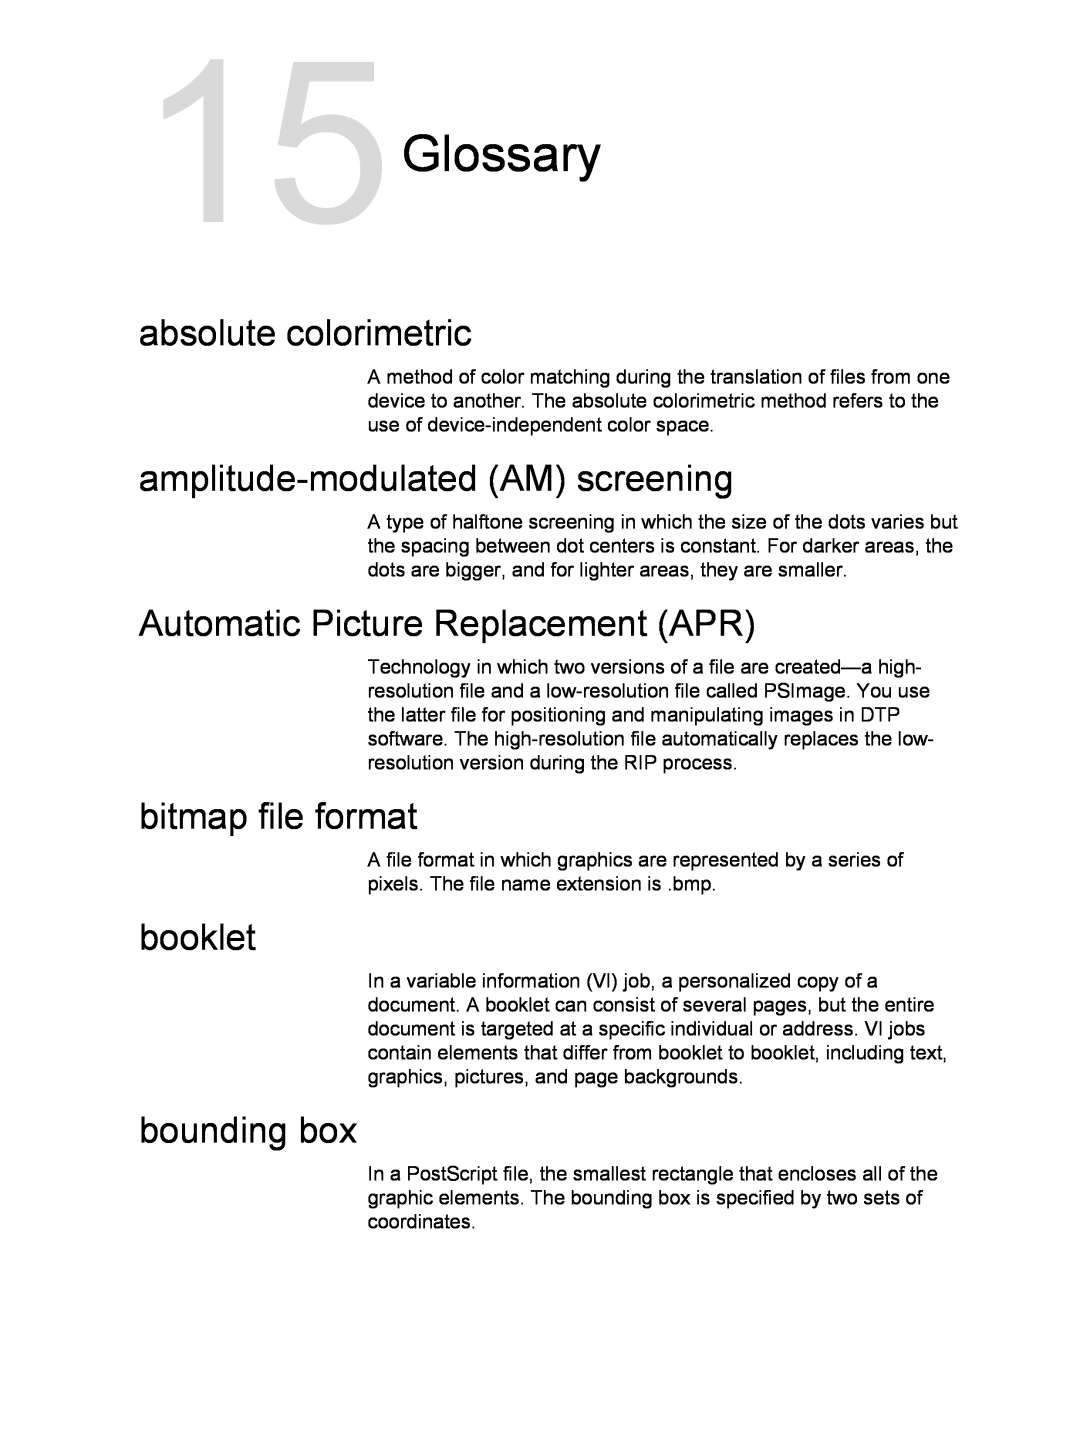 Xerox 550 15Glossary, absolute colorimetric, amplitude-modulatedAM screening, Automatic Picture Replacement APR, booklet 